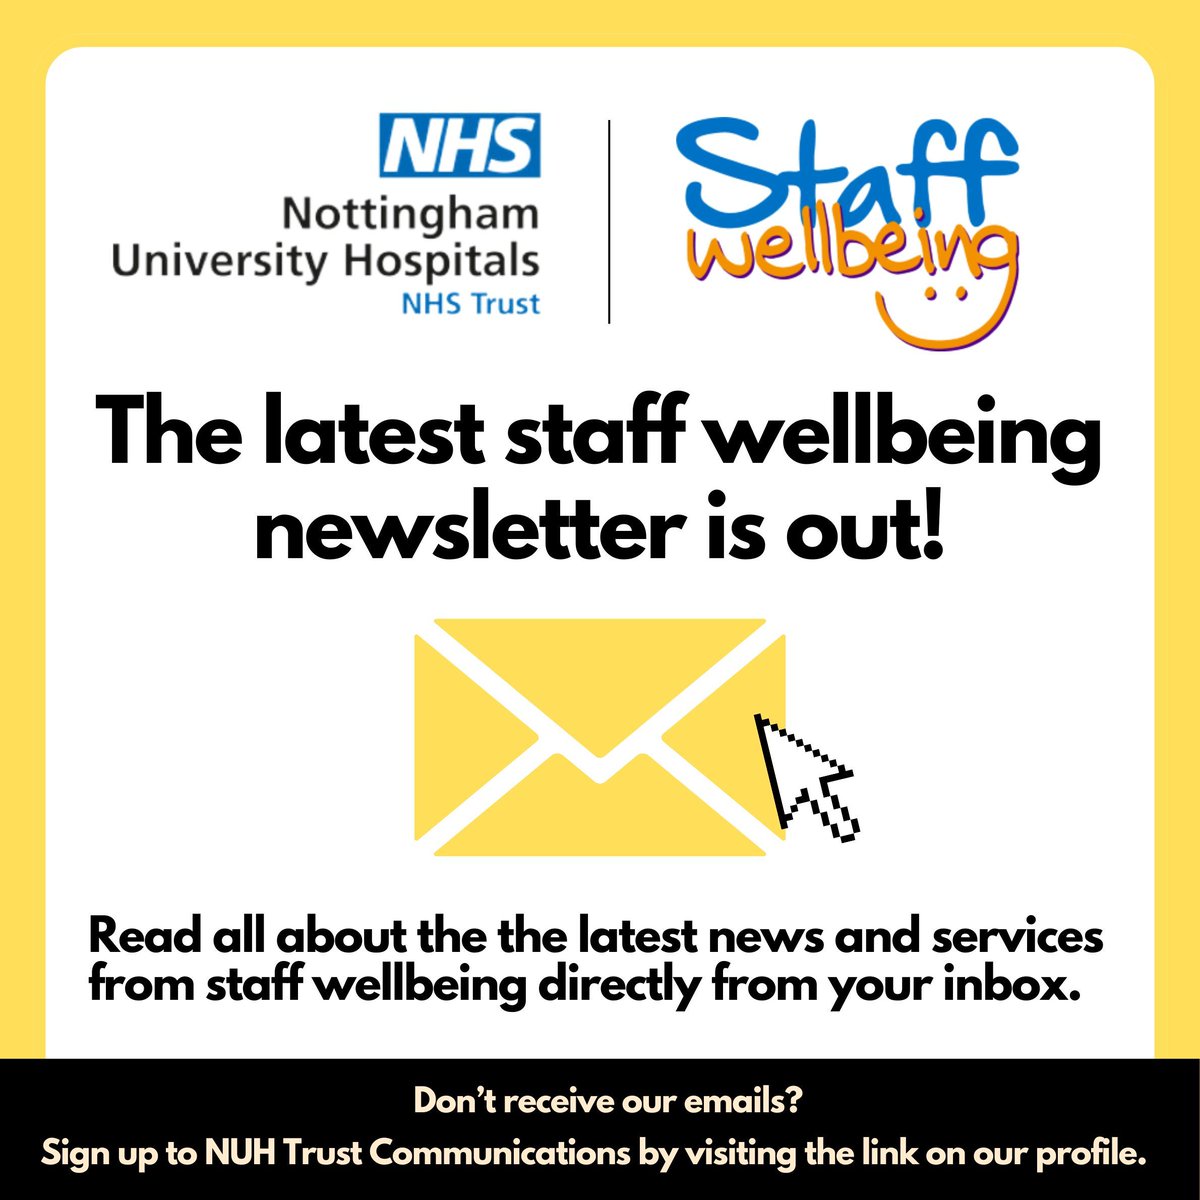 Our April newsletter should be hitting your inboxes this morning, check out all the sessions and activities we have coming up this month! Book your place here: buff.ly/3VD0Cz9